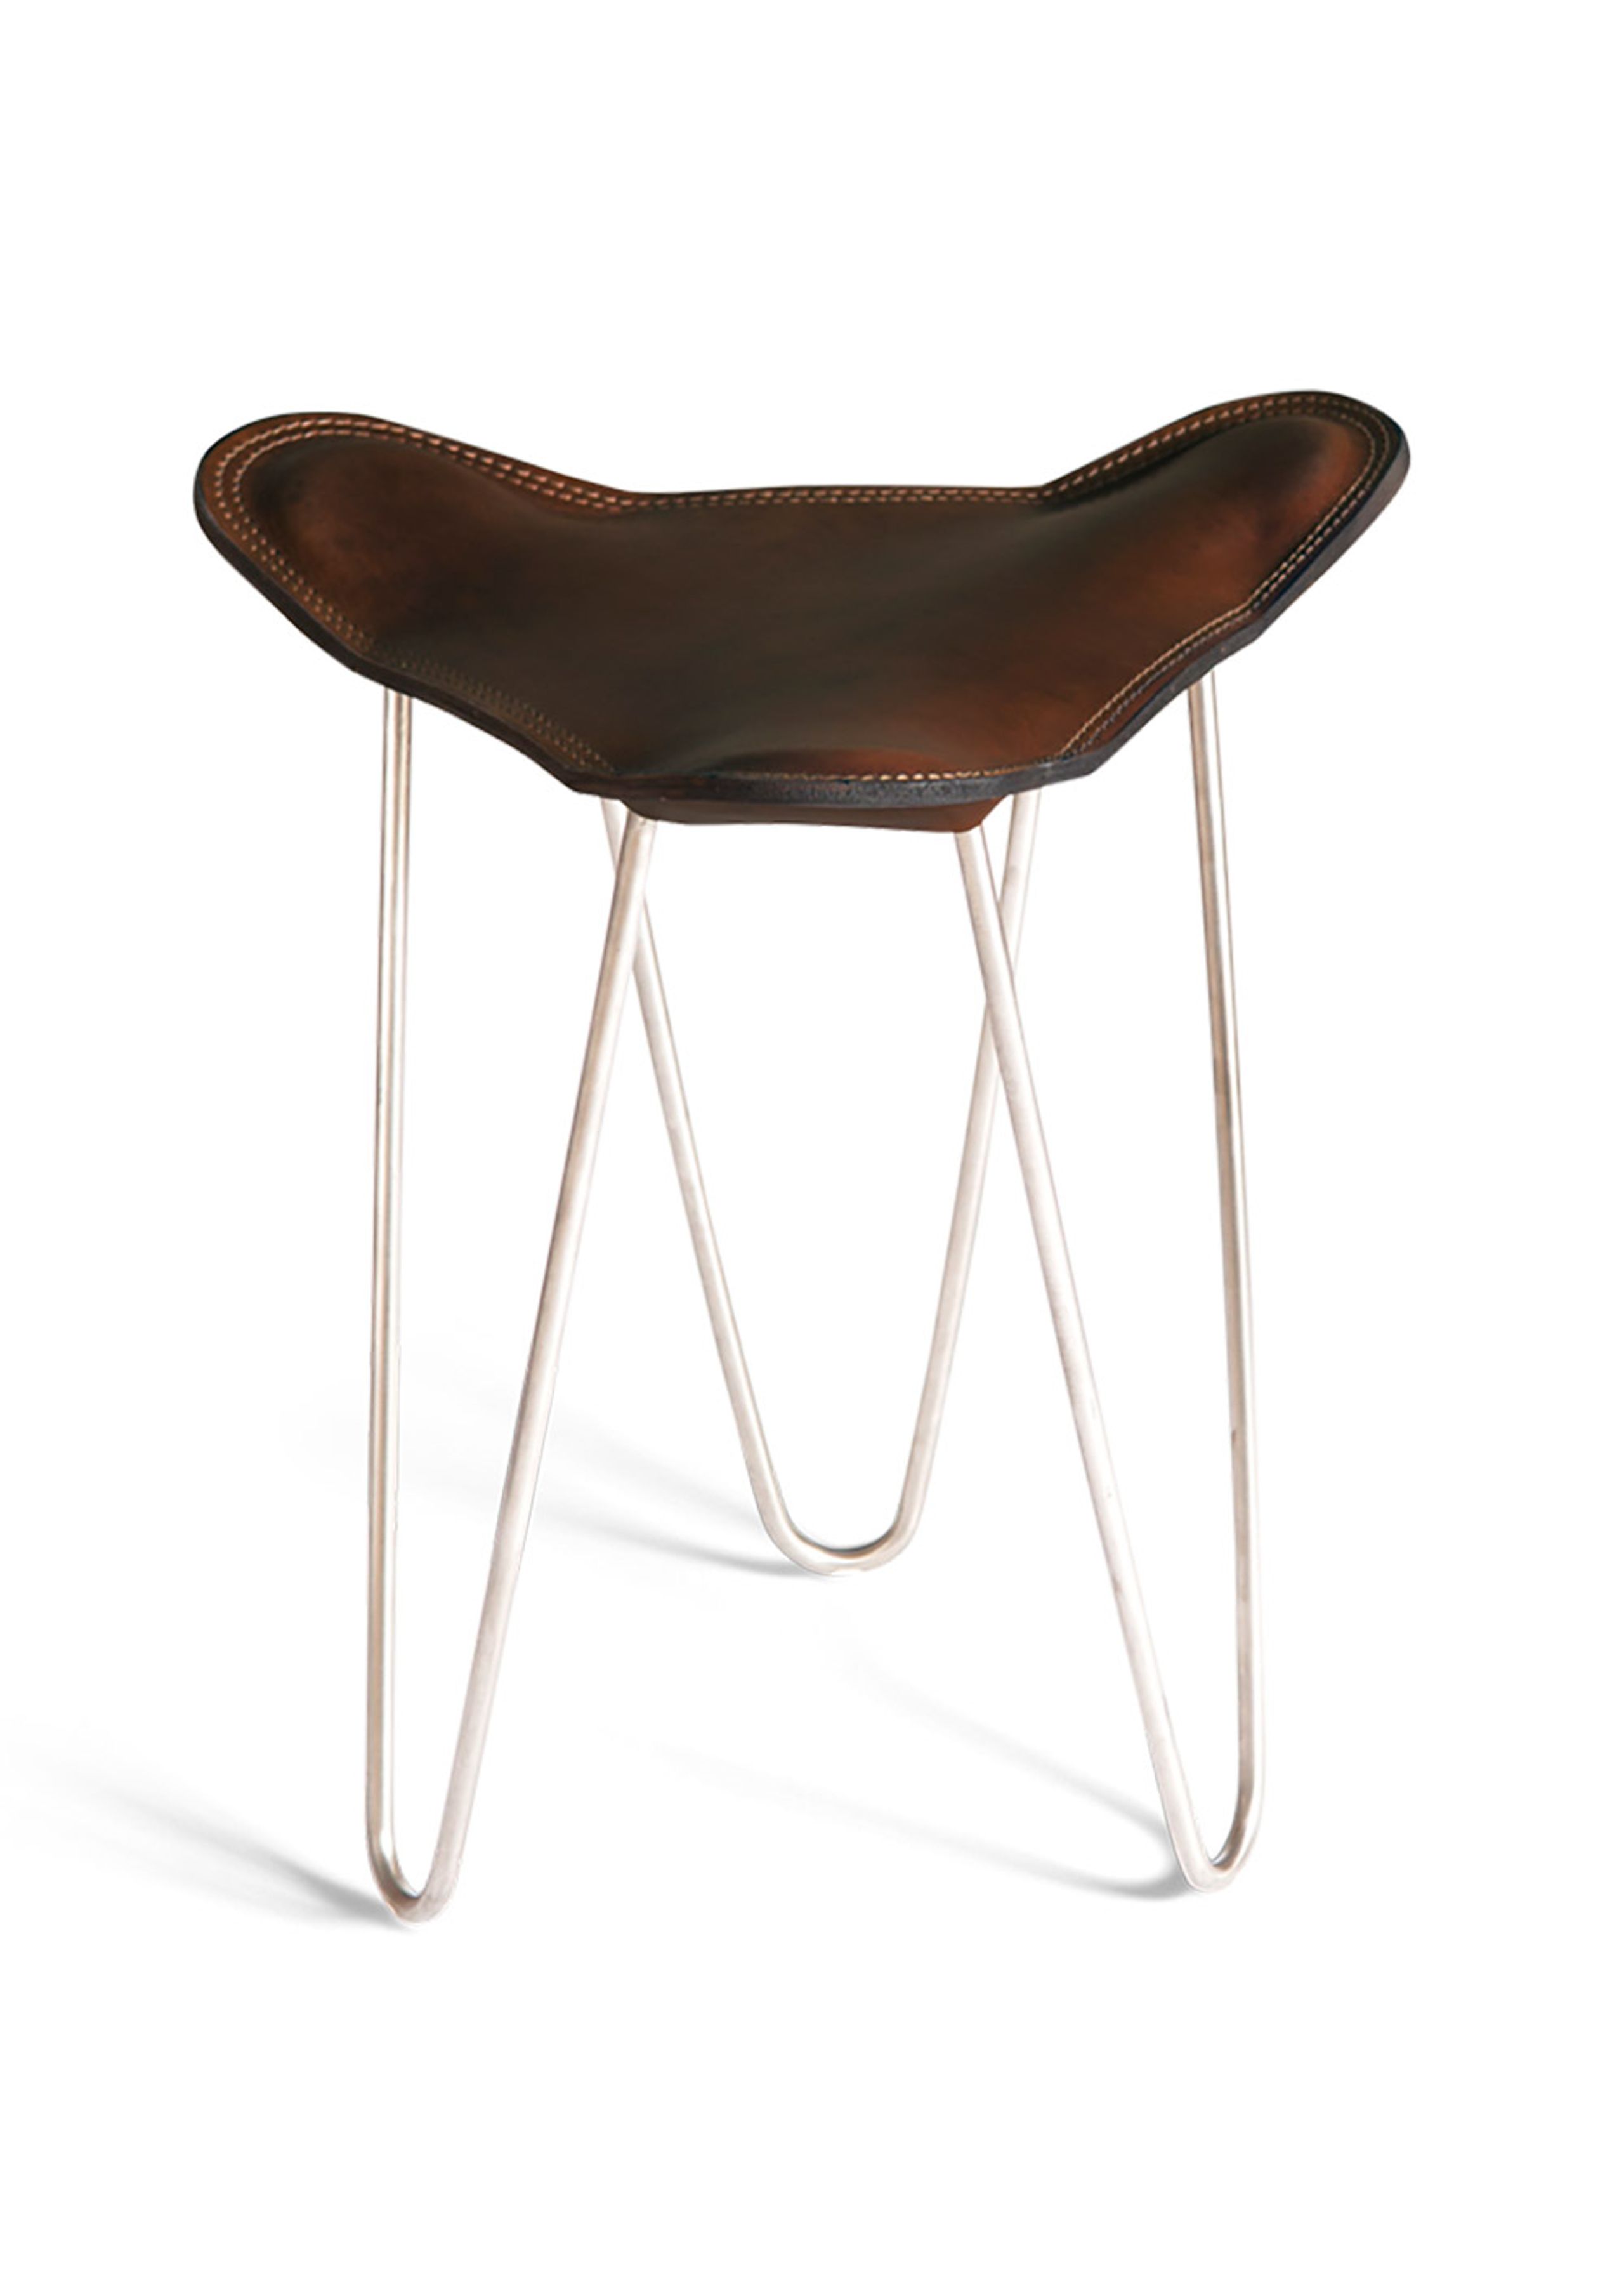 OX DENMARQ - Banqueta - TRIFOLIUM Stool - Mocca Leather / Stainless Steel